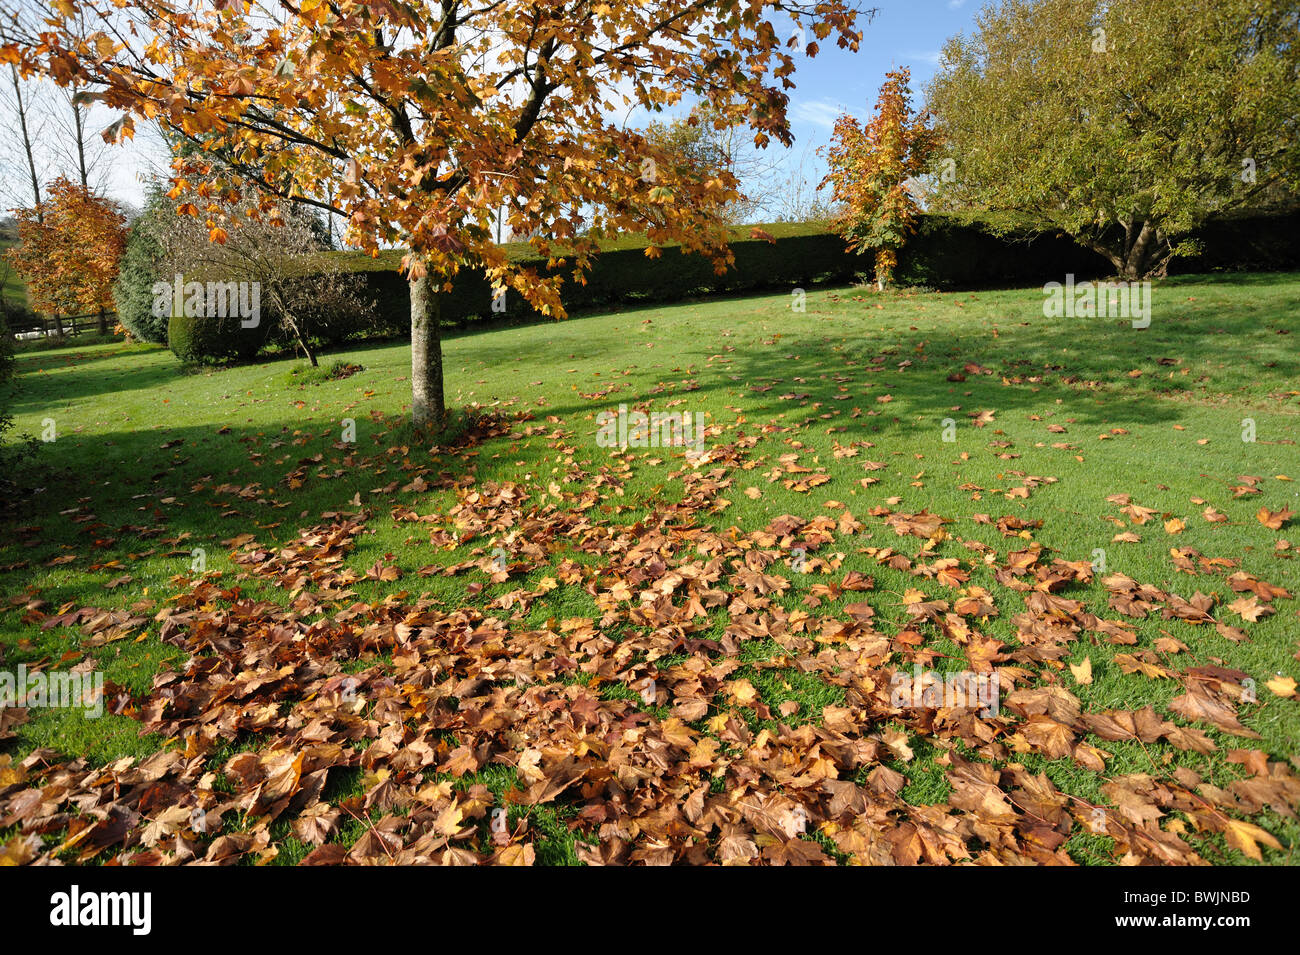 Ornamental maple (Acer spp.) in full autumn colour with fallen leaves in a large garden Stock Photo